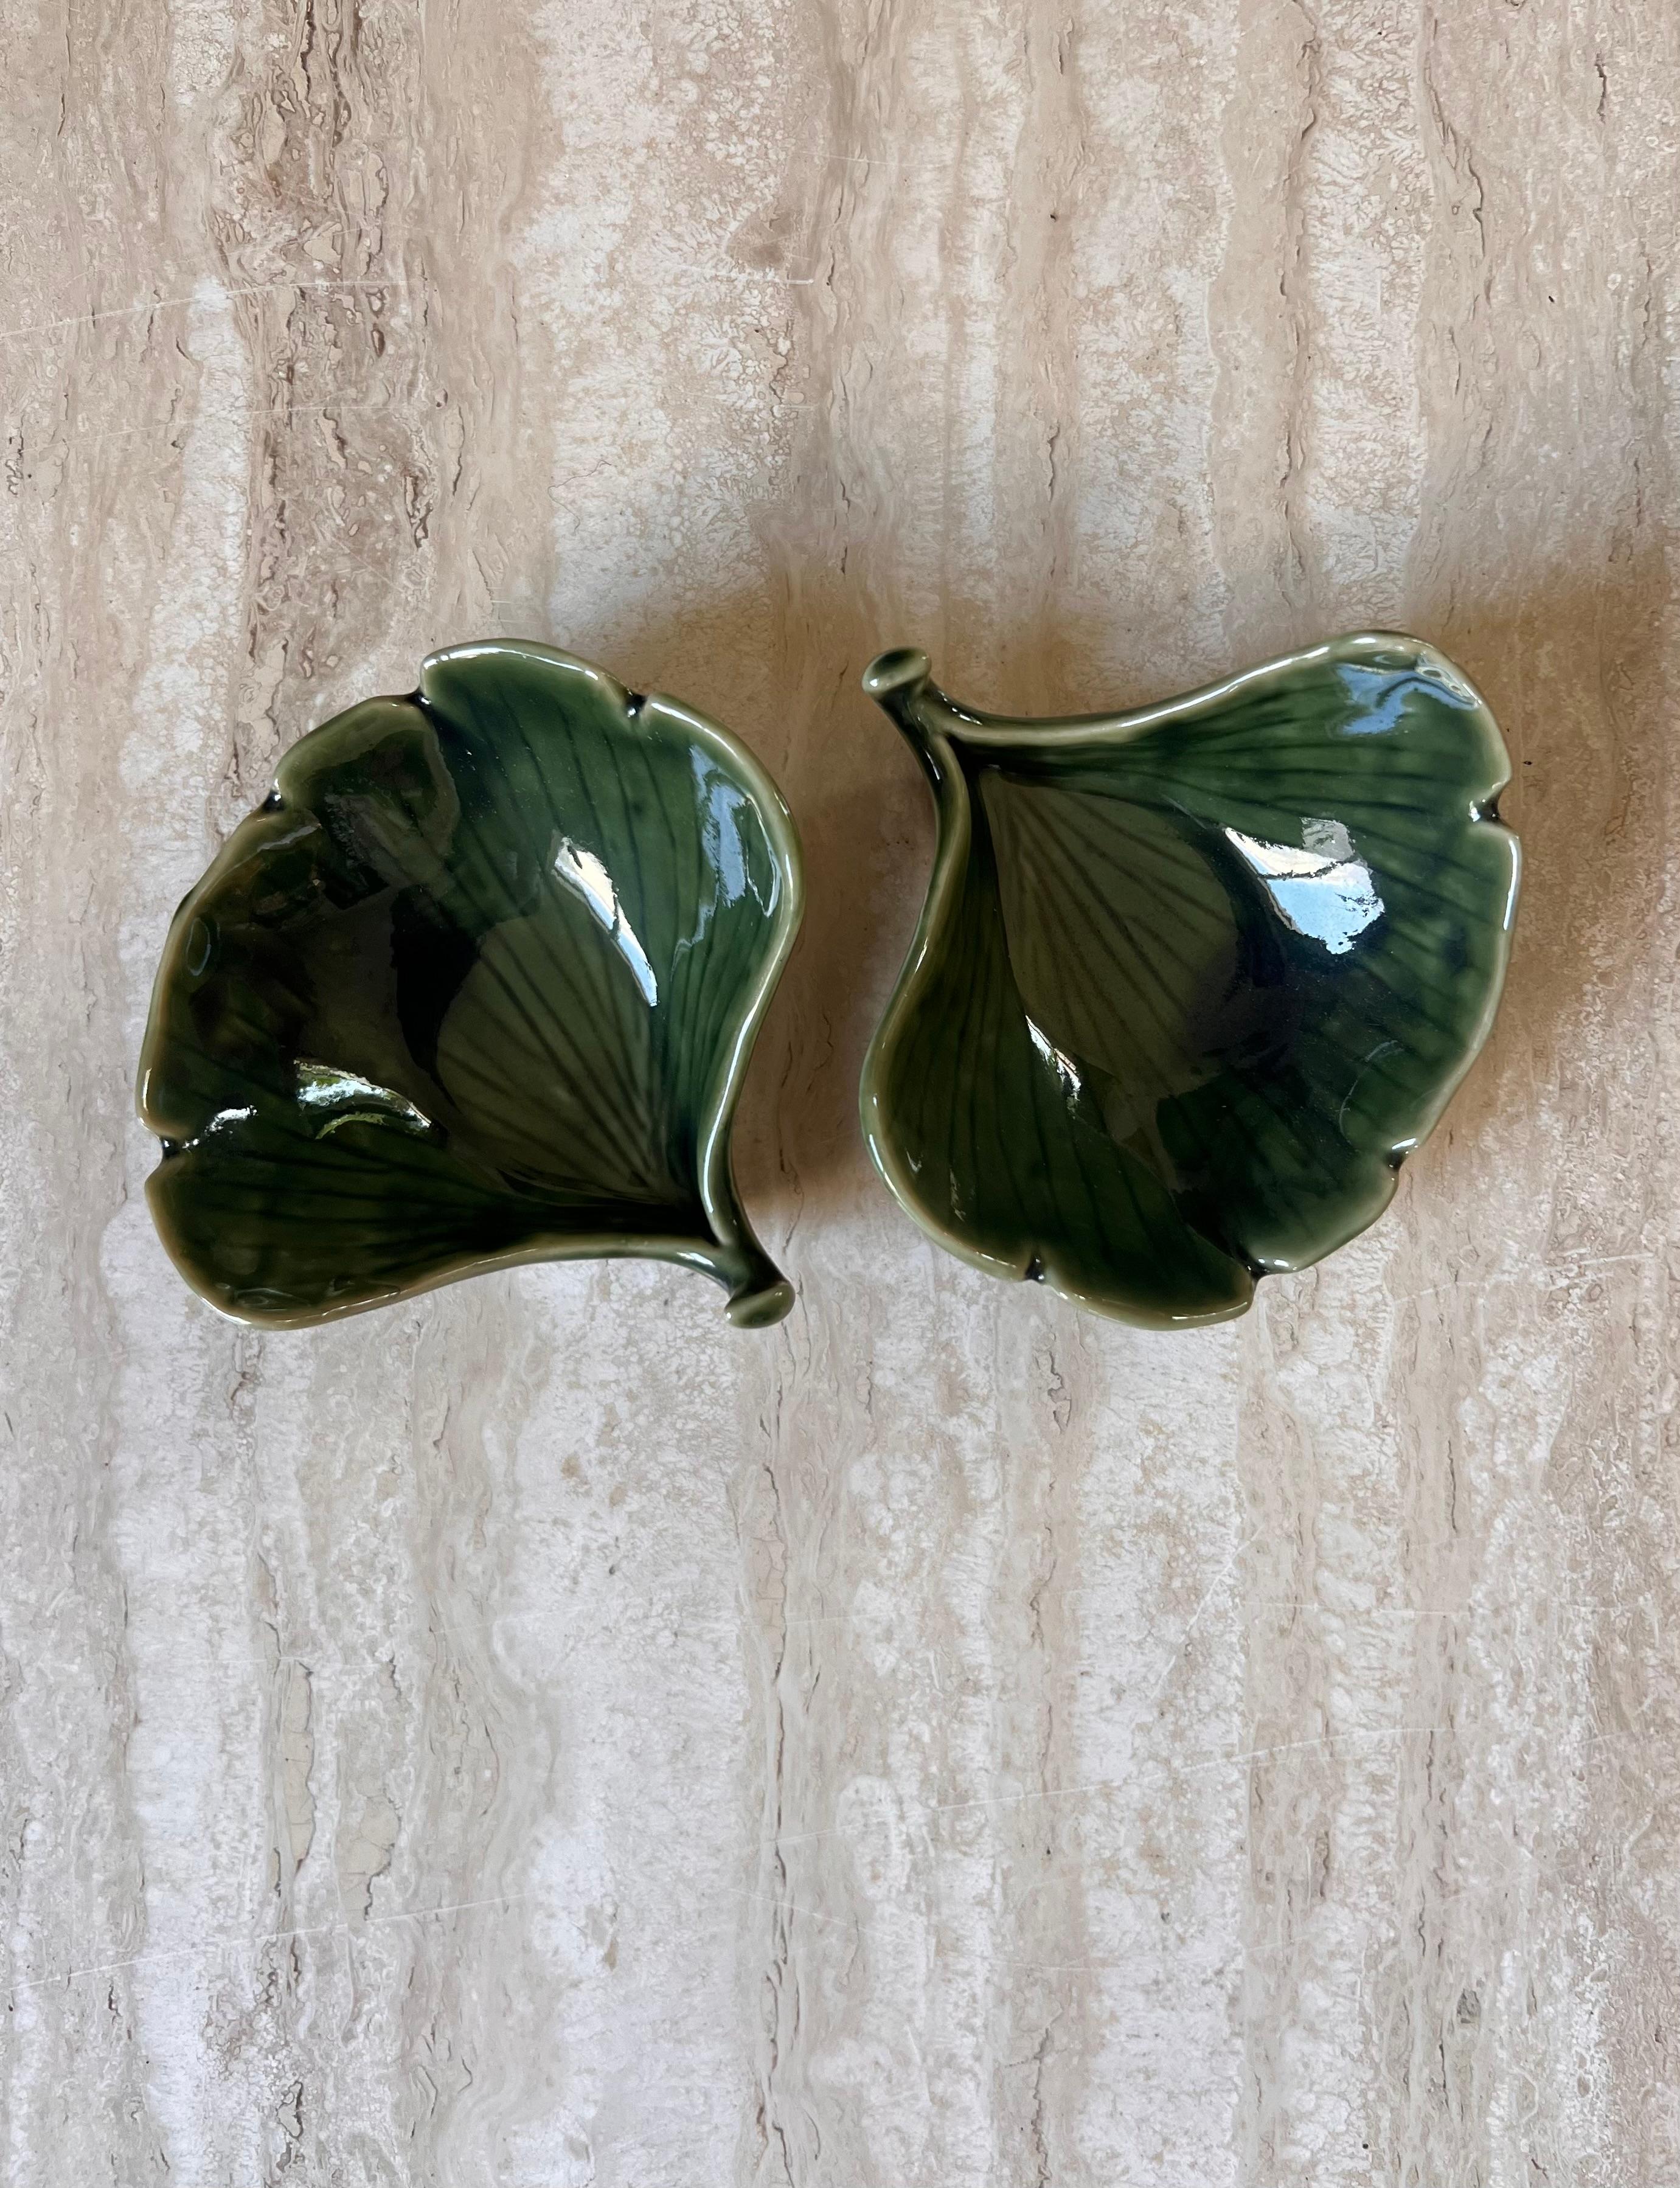 A pair of small vintage Japanese ceramic leaf dishes, 20th century. To hold soy sauce and wasabi, or perhaps even olives or nuts on a larger spread. Shown in later pics with longer Japanese leaf dishes, also available in store - I am happy to bundle